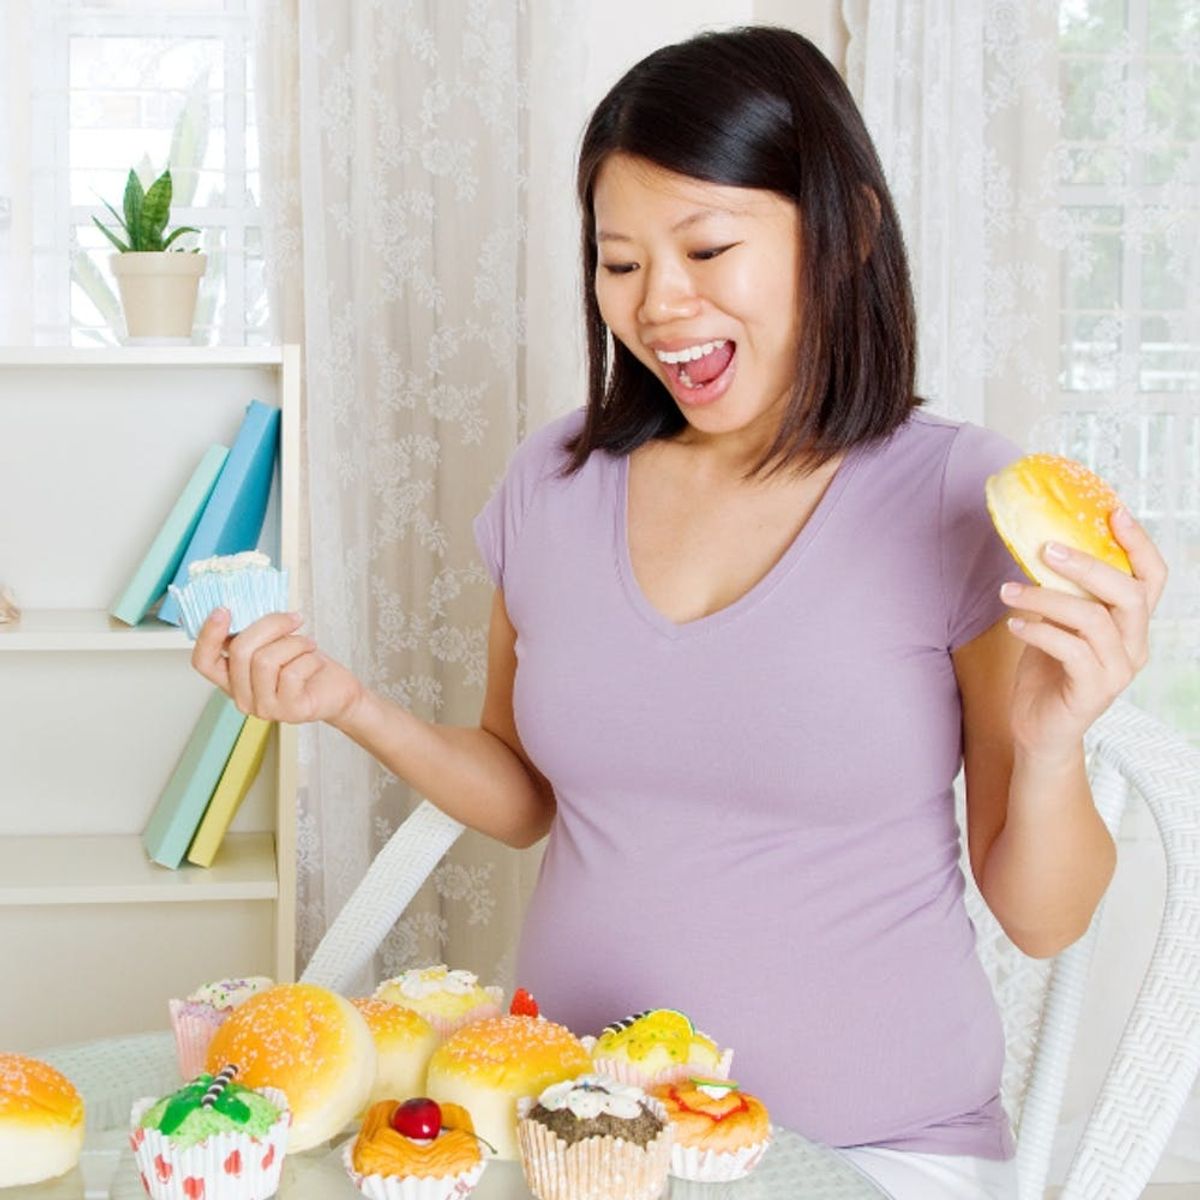 Eating Sugar During Pregnancy Could be Linked to Asthma in Children